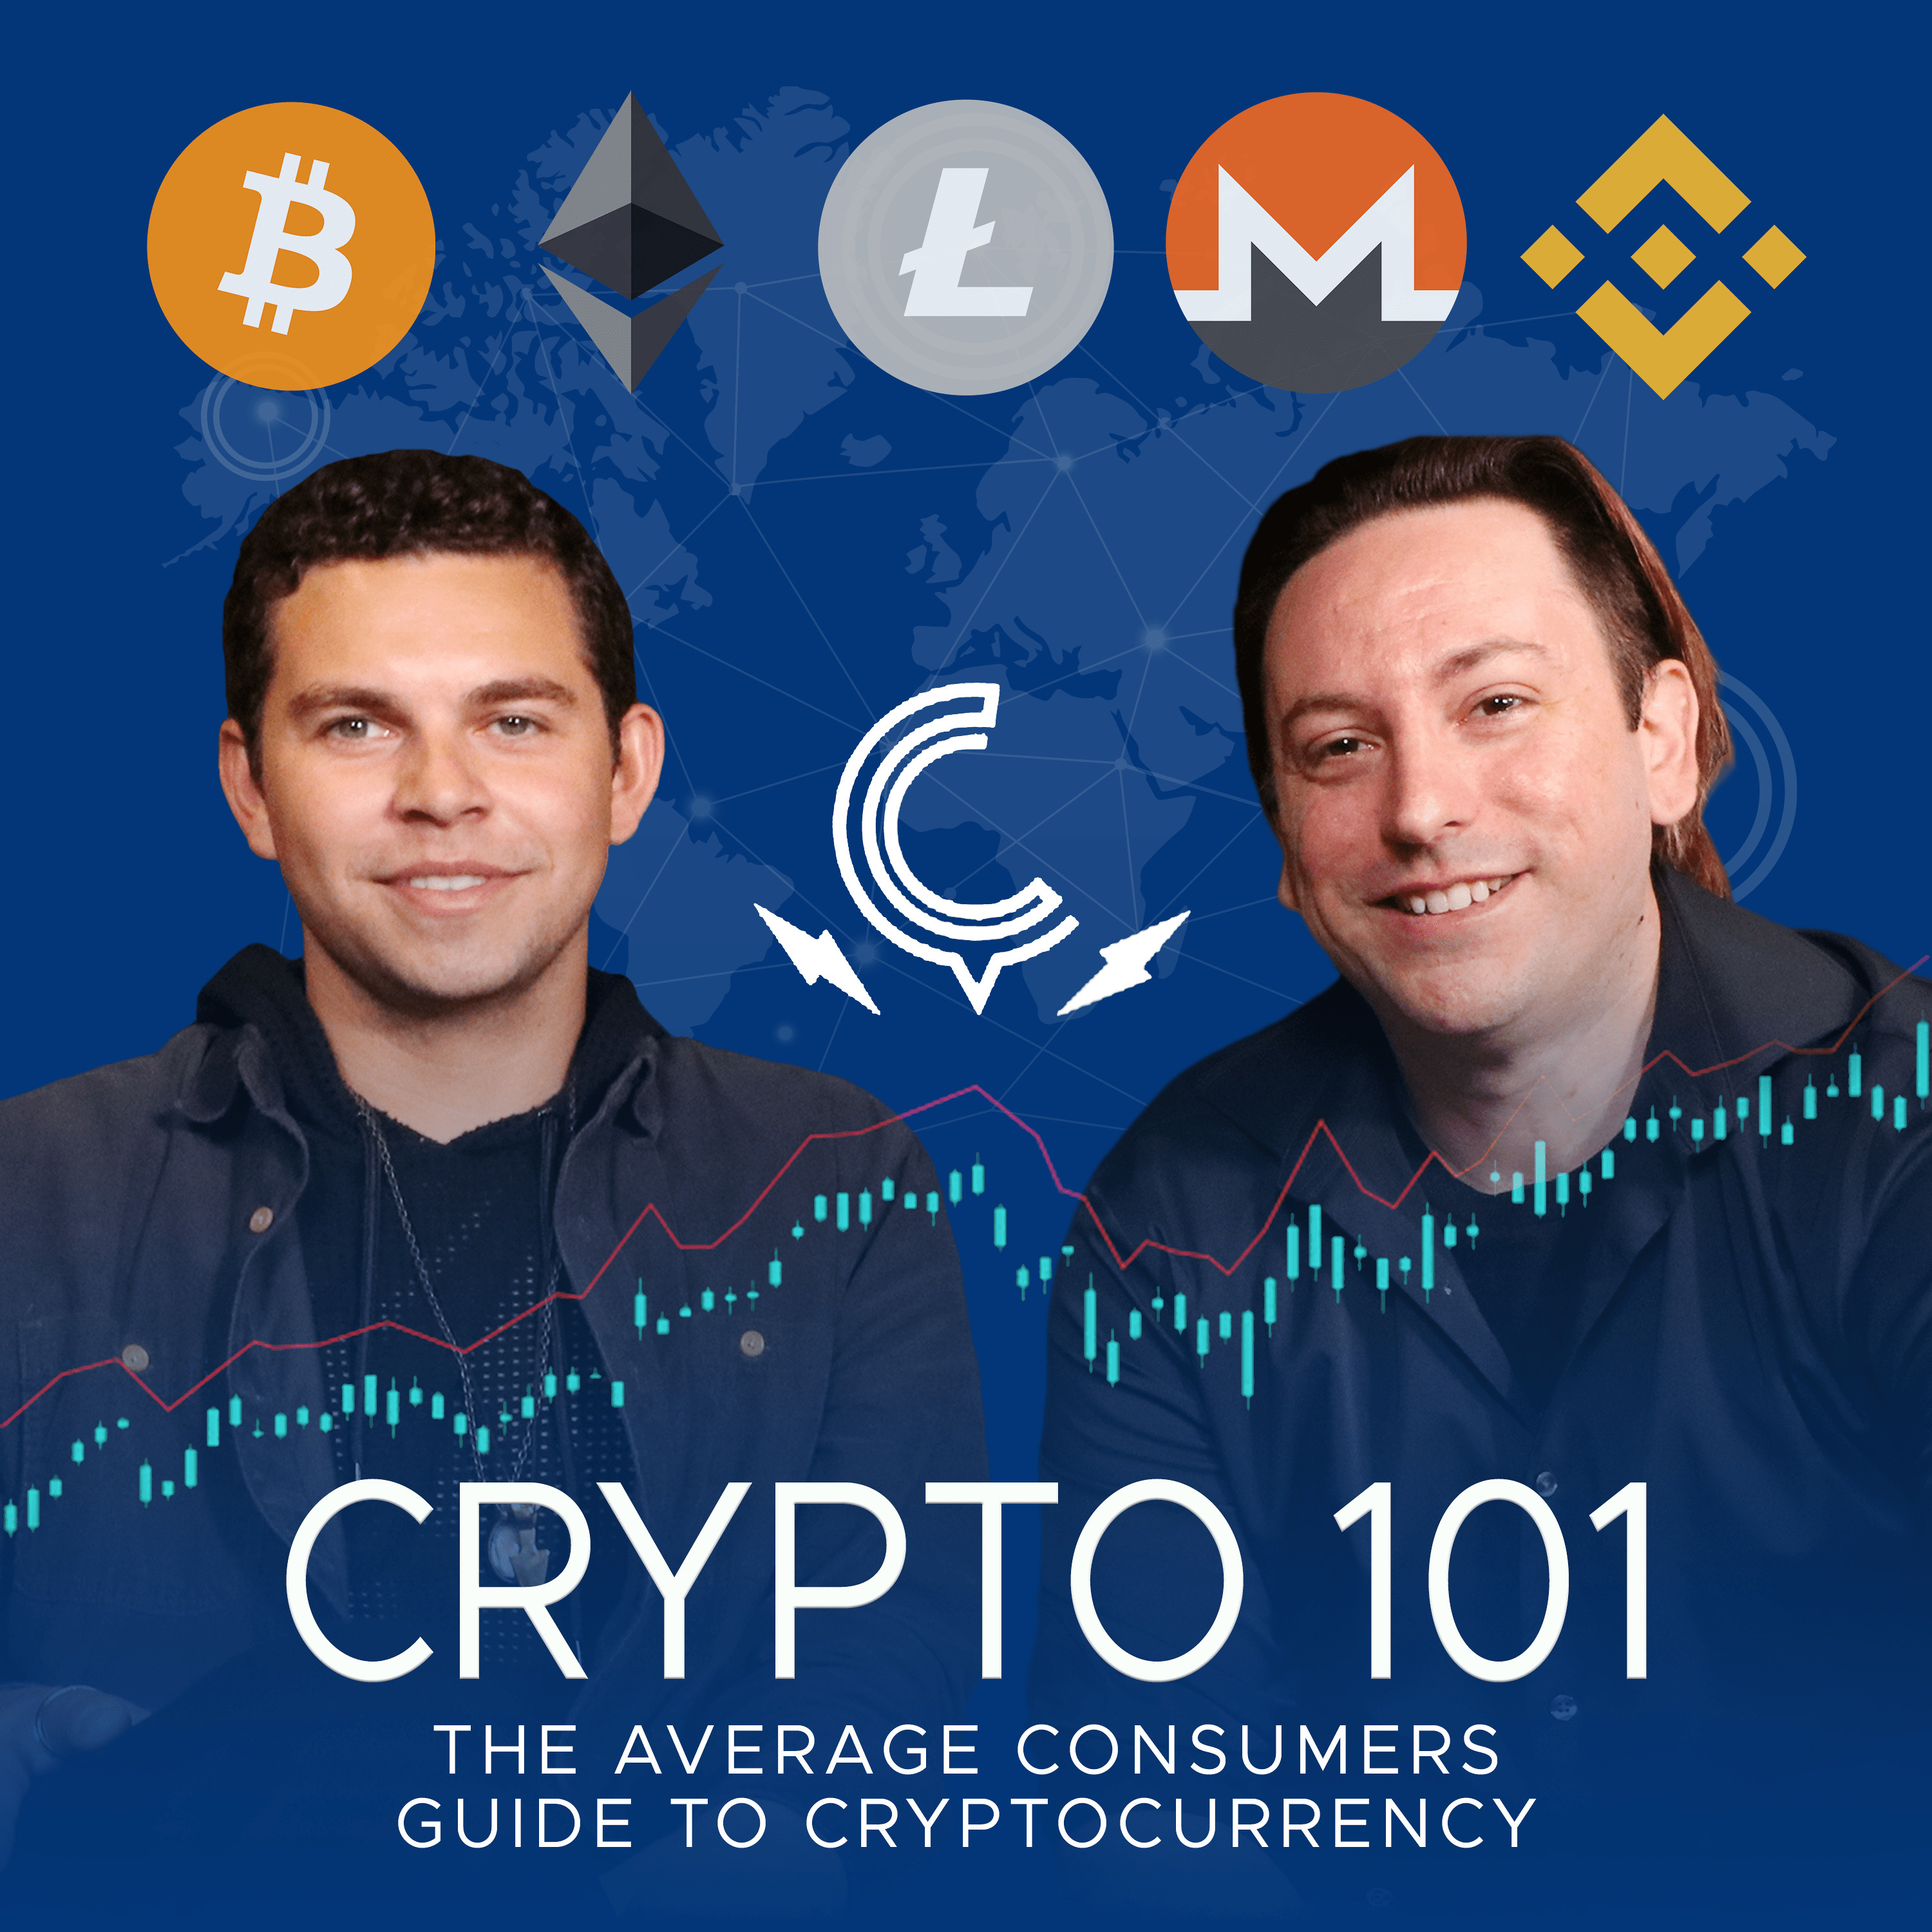 Ep. 143 - ICO101 & Fluzcoin: The intelligent retail currency protocol